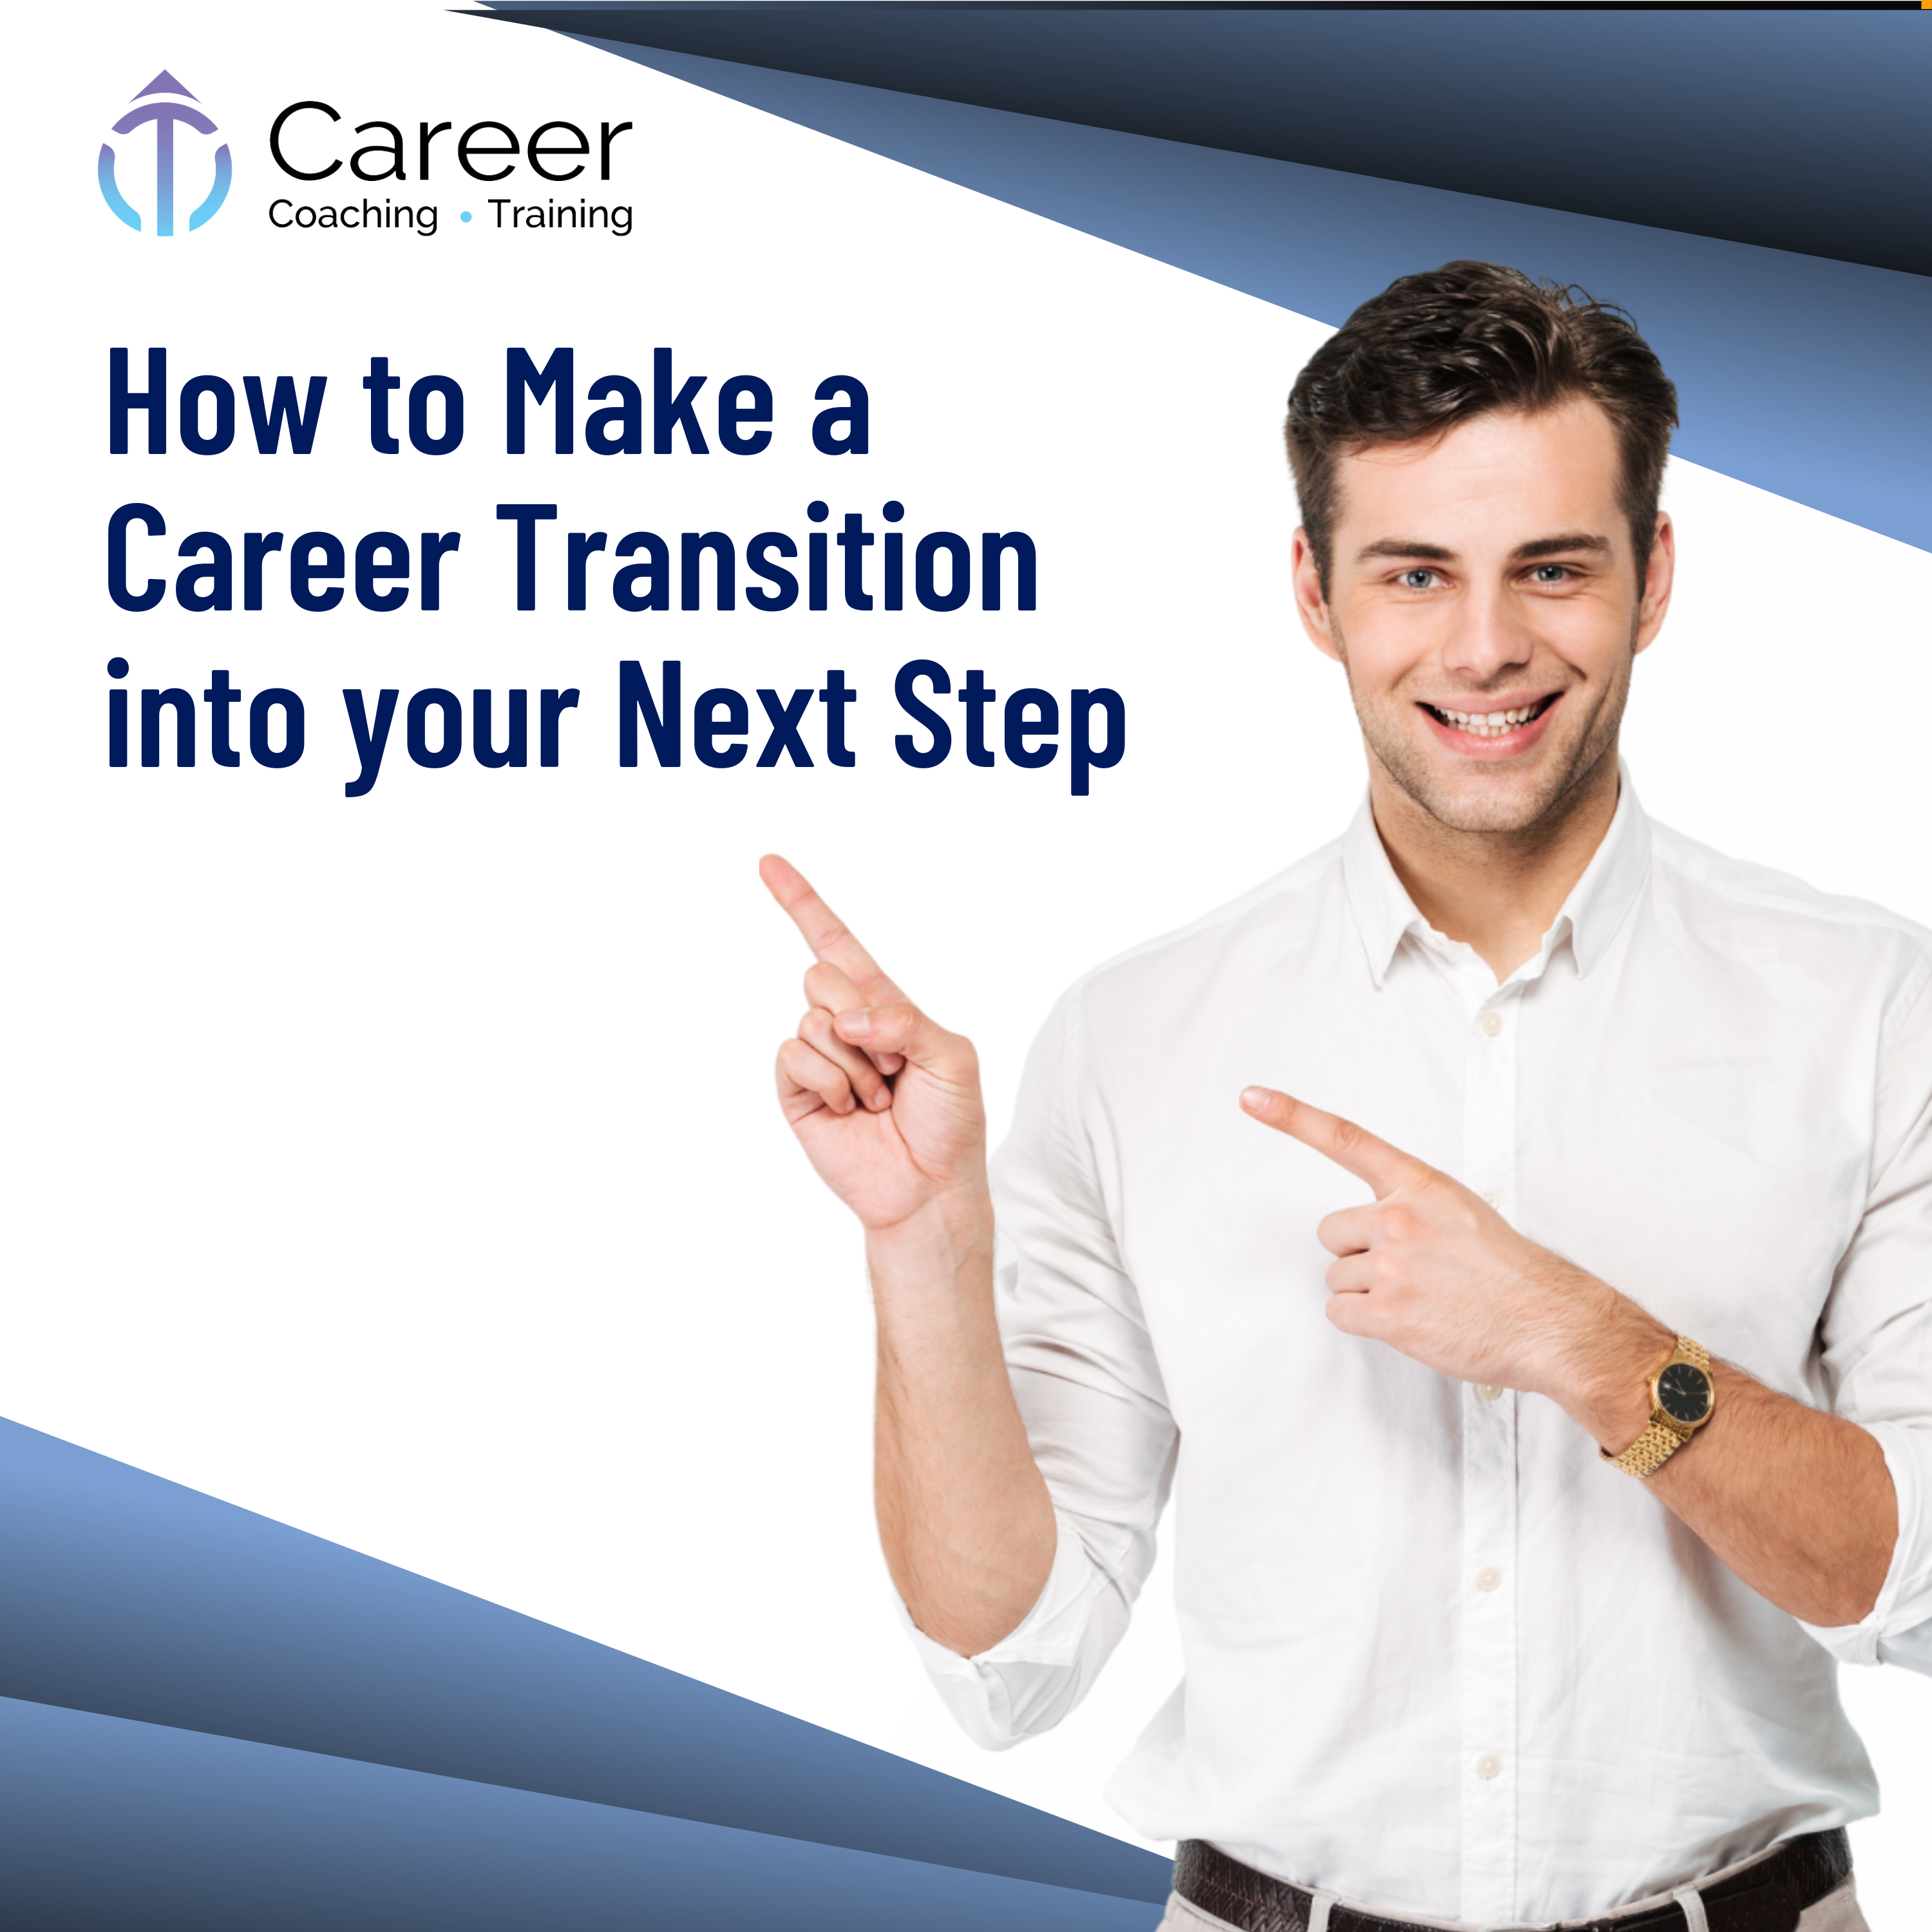 How to Make a Career Transition into your Next Step